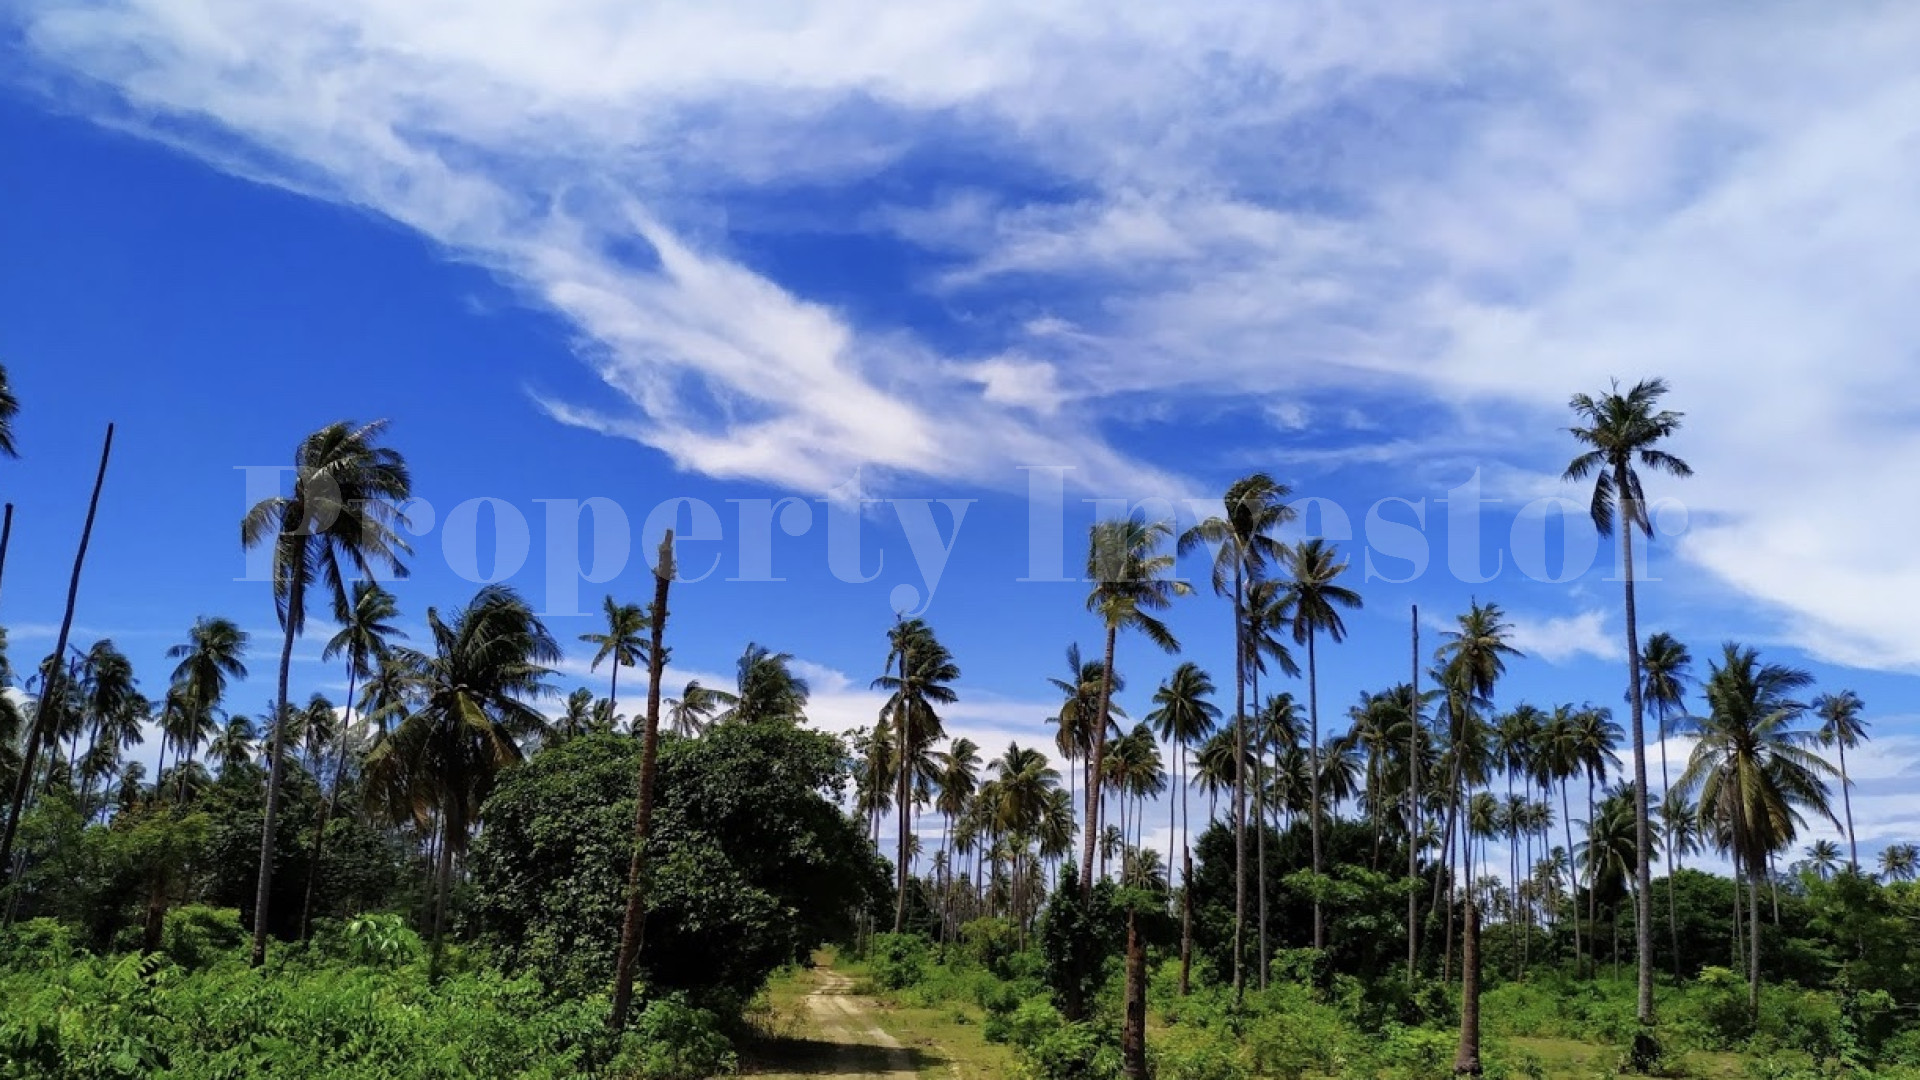 Expansive 192 Hectare Private Tropical Island for Residential or Commercial Development for Sale in Thailand